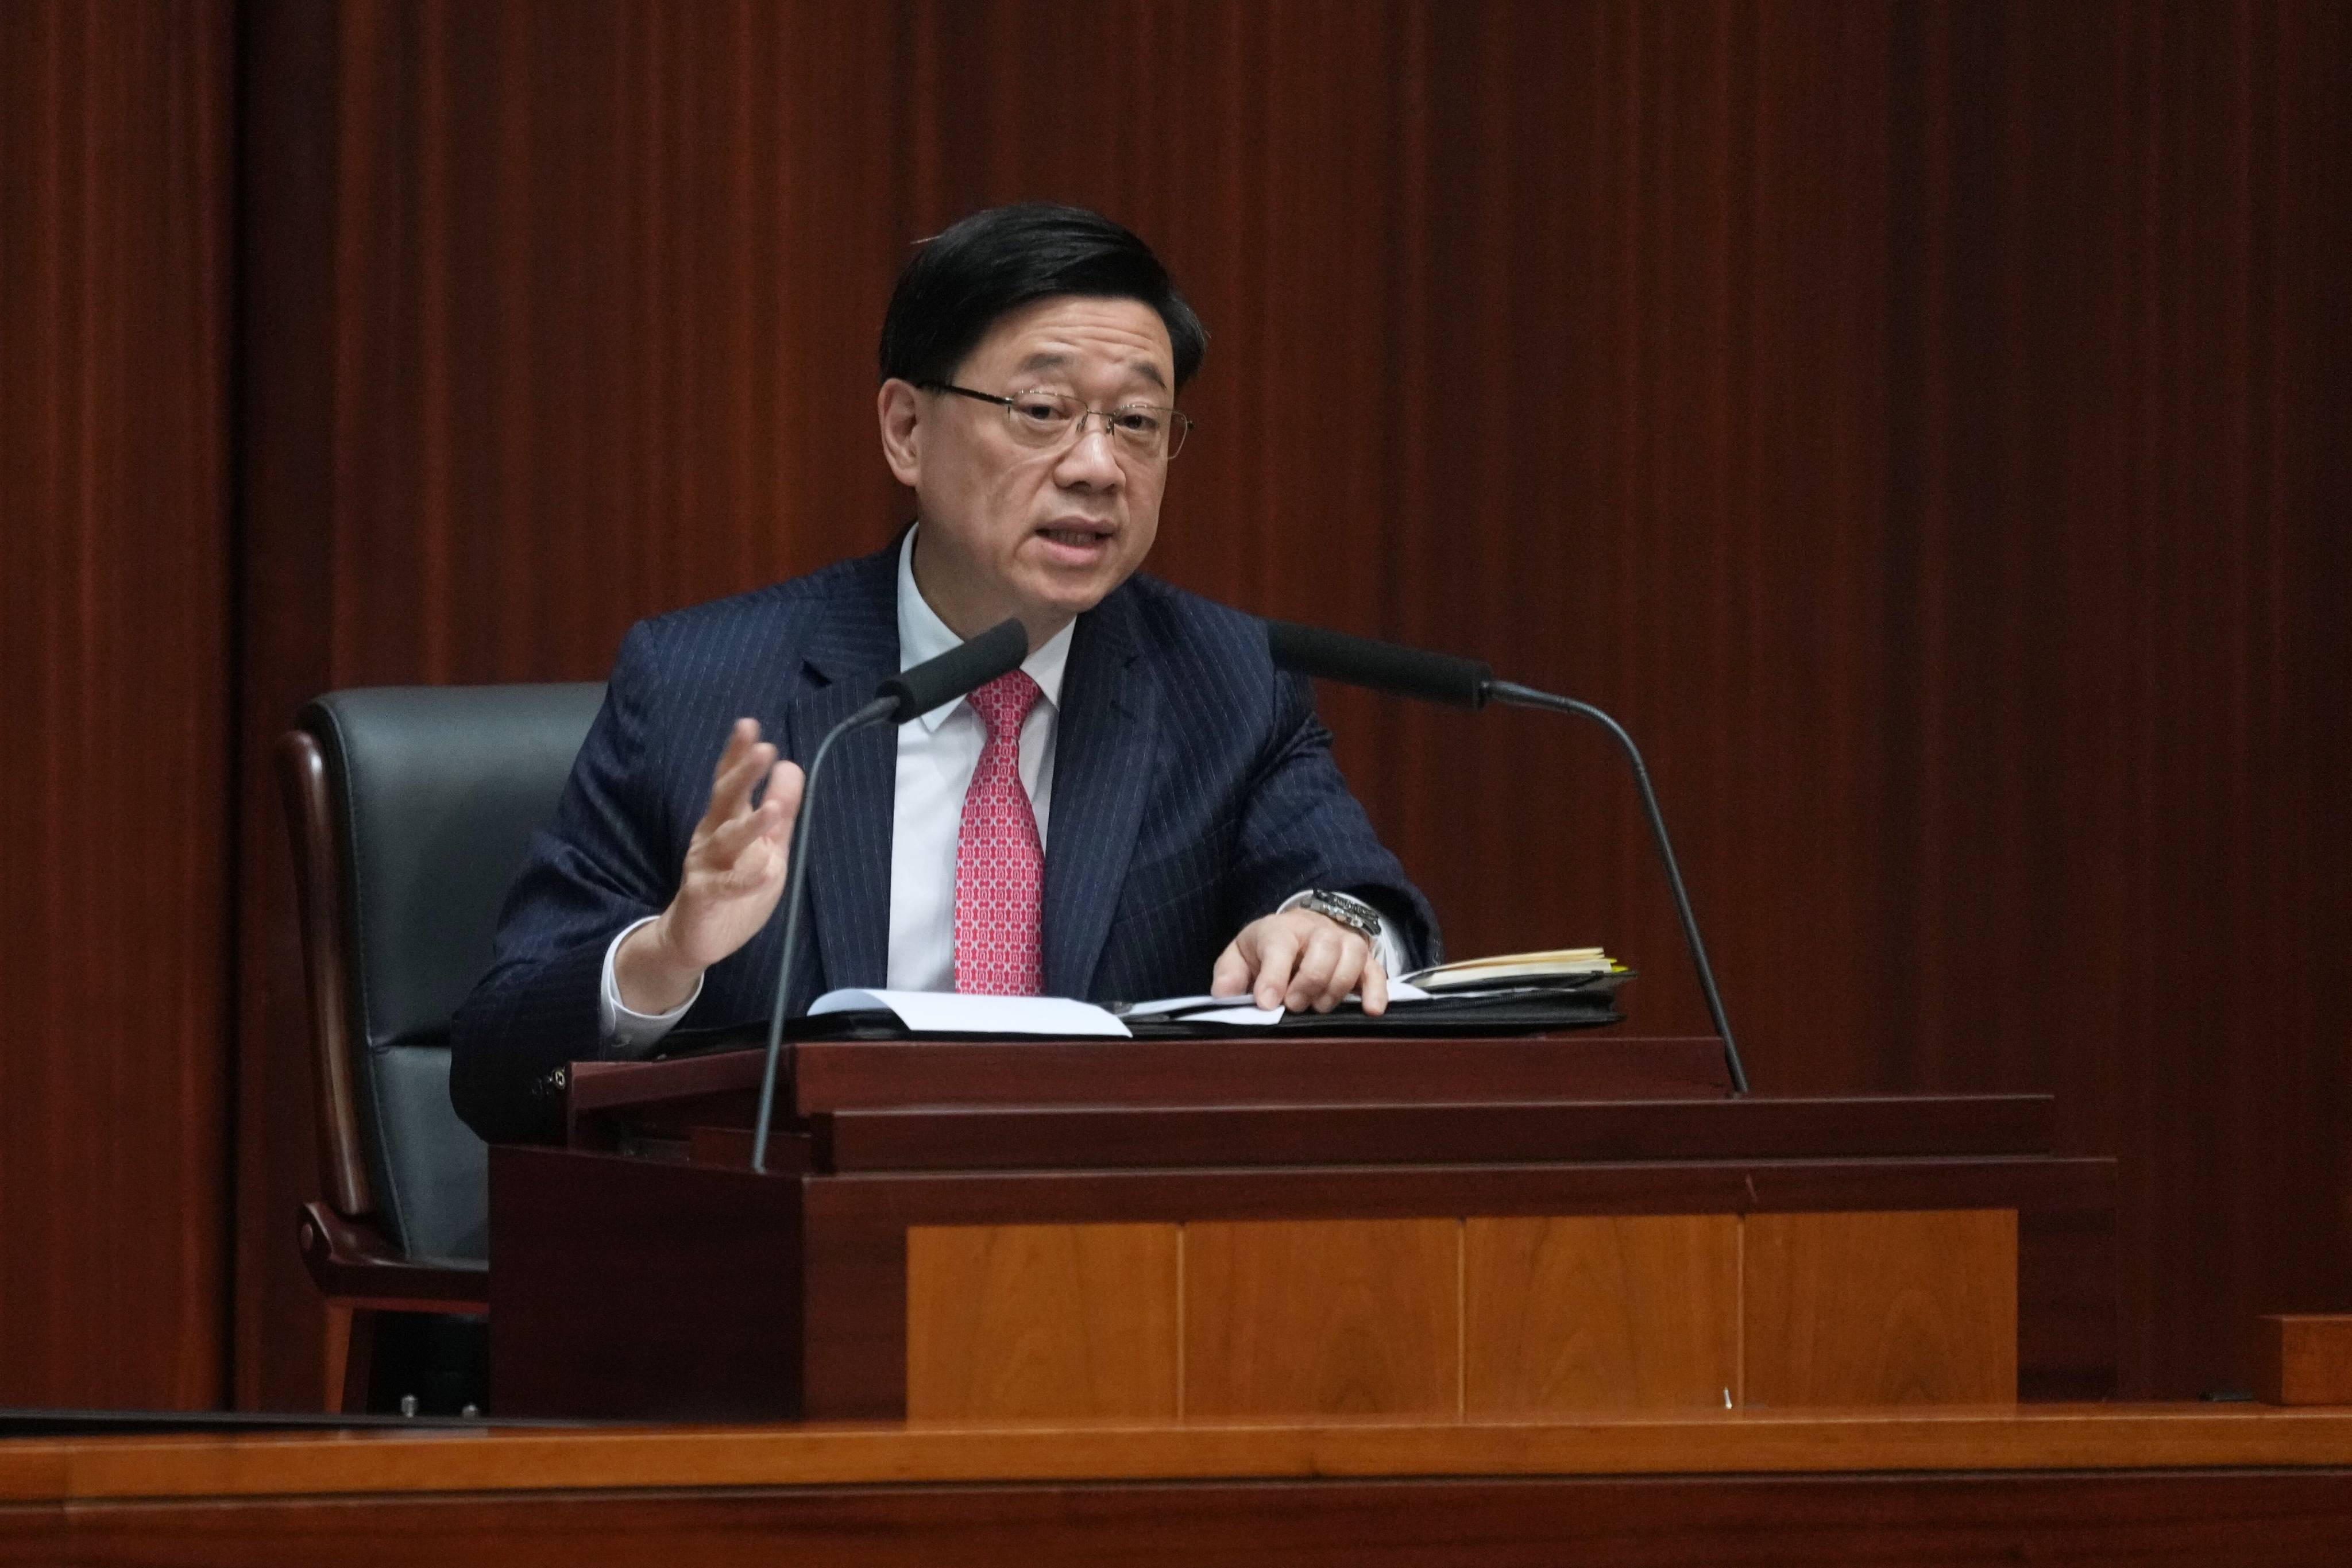 City leader John Lee at the Q&A session. He says the government will set up ‘special core teams’ to explain the Article 23 security law. Photo: Elson Li